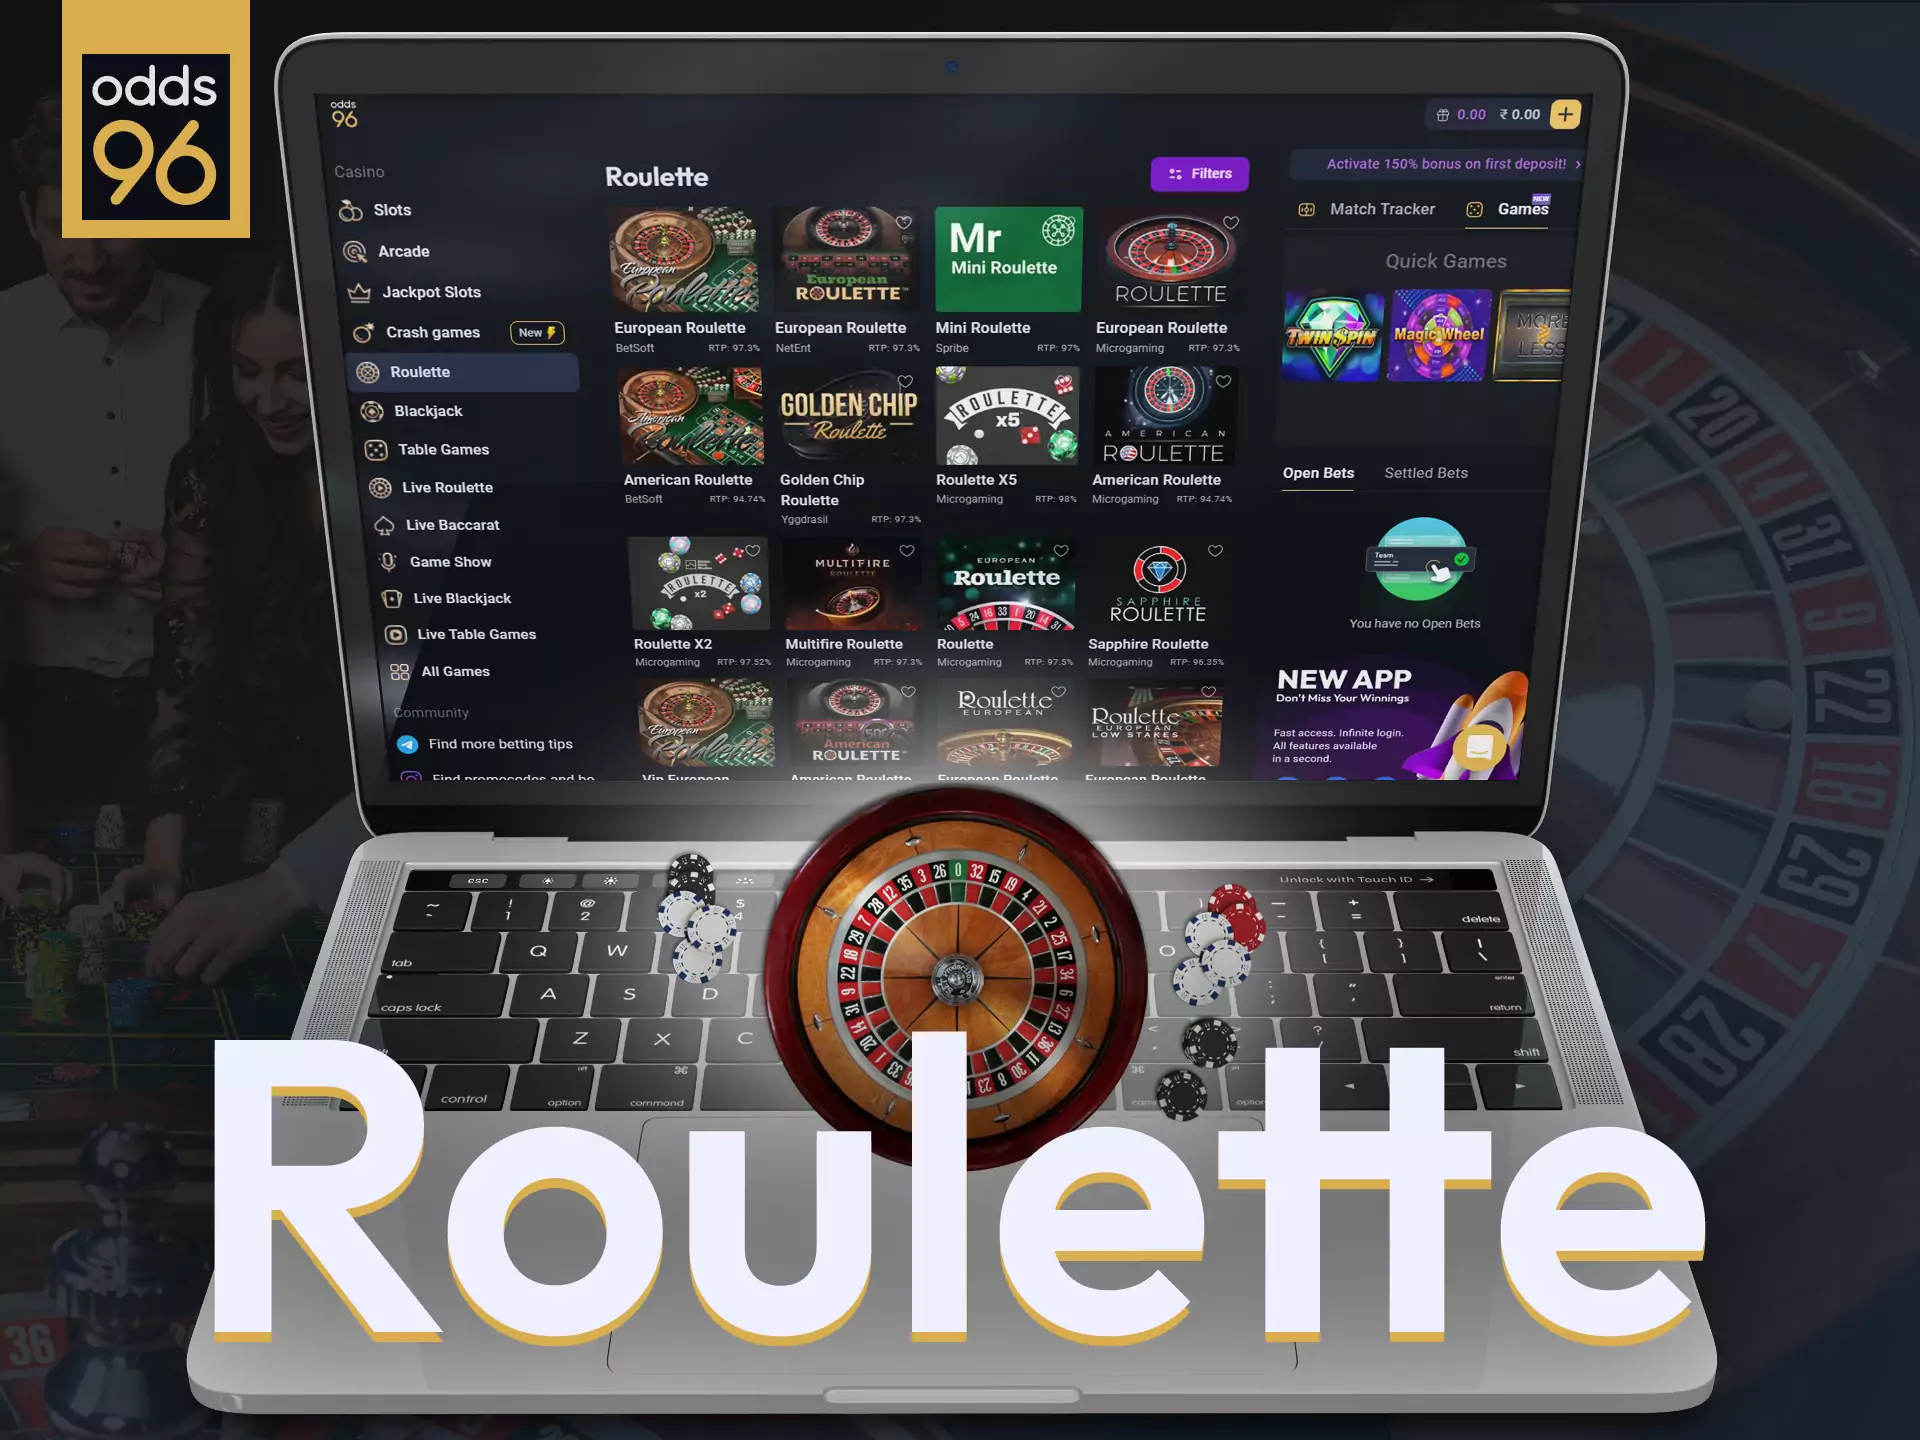 Place bets at Odds96 casino on roulette.